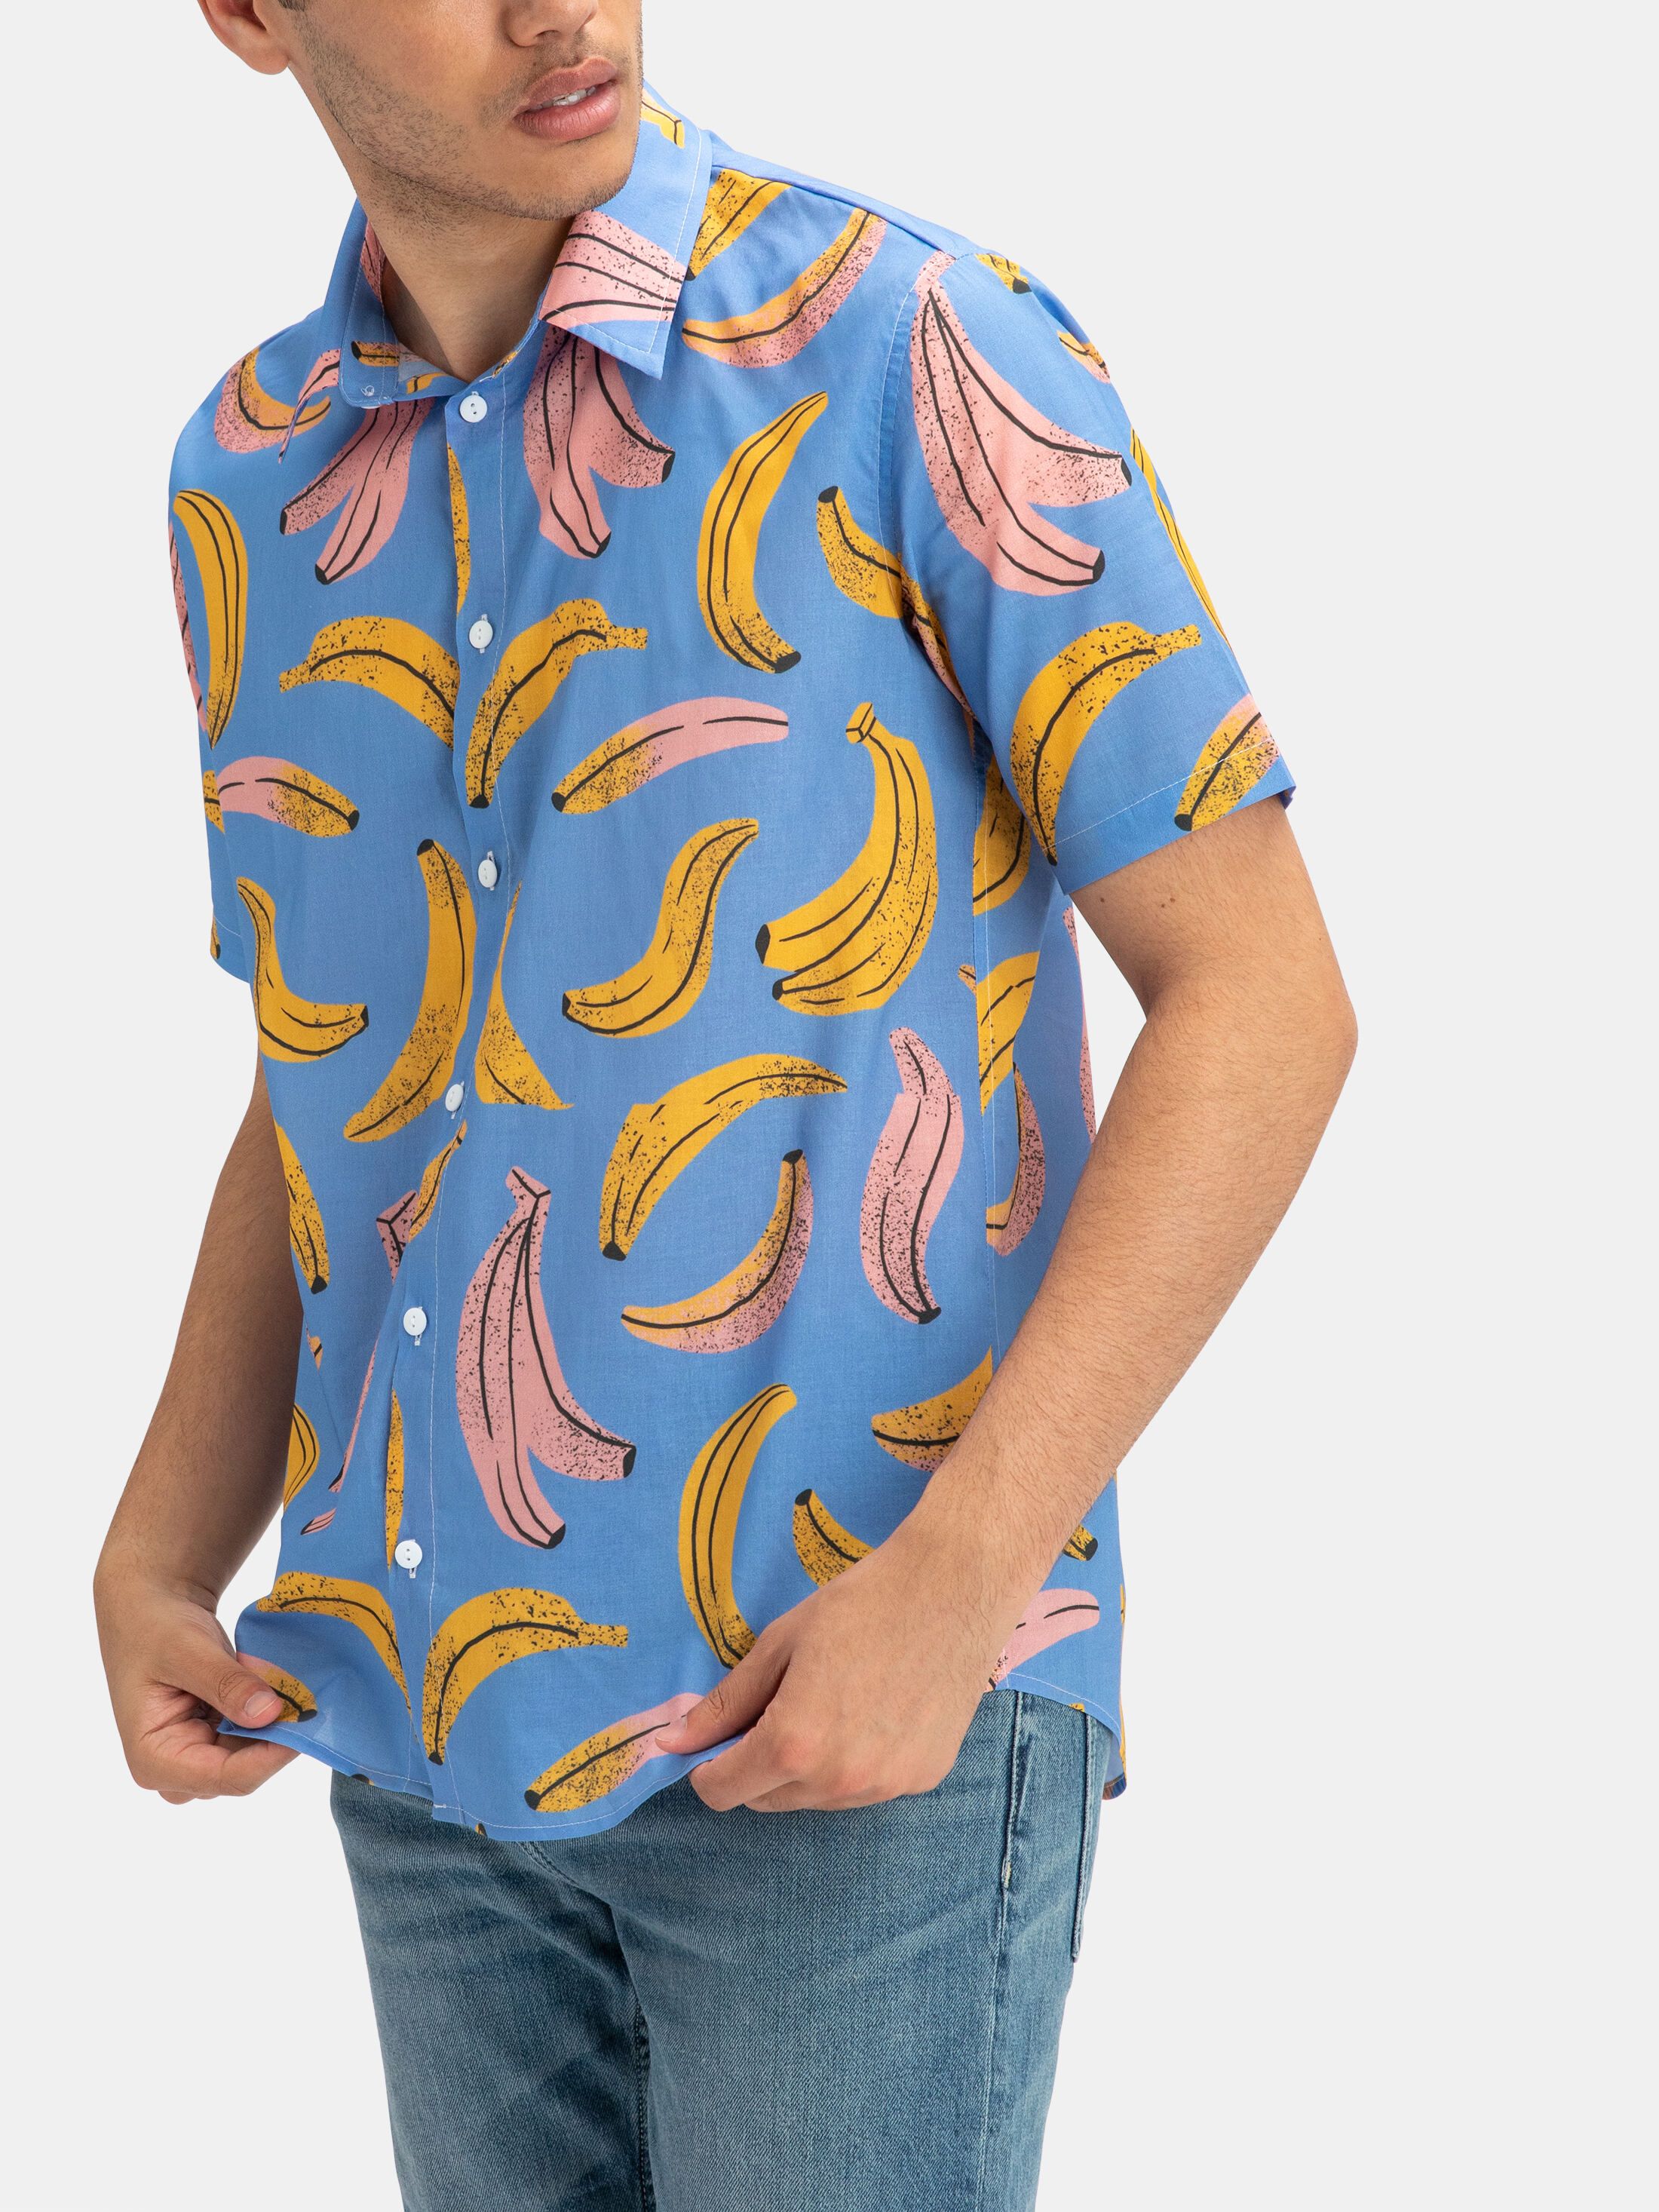 https://raven.contrado.app/resources/images/2021-9/193111/custom-all-over-print-button-up-shirts-1469700_l.jpg?auto=format&q=80&max-w=2200